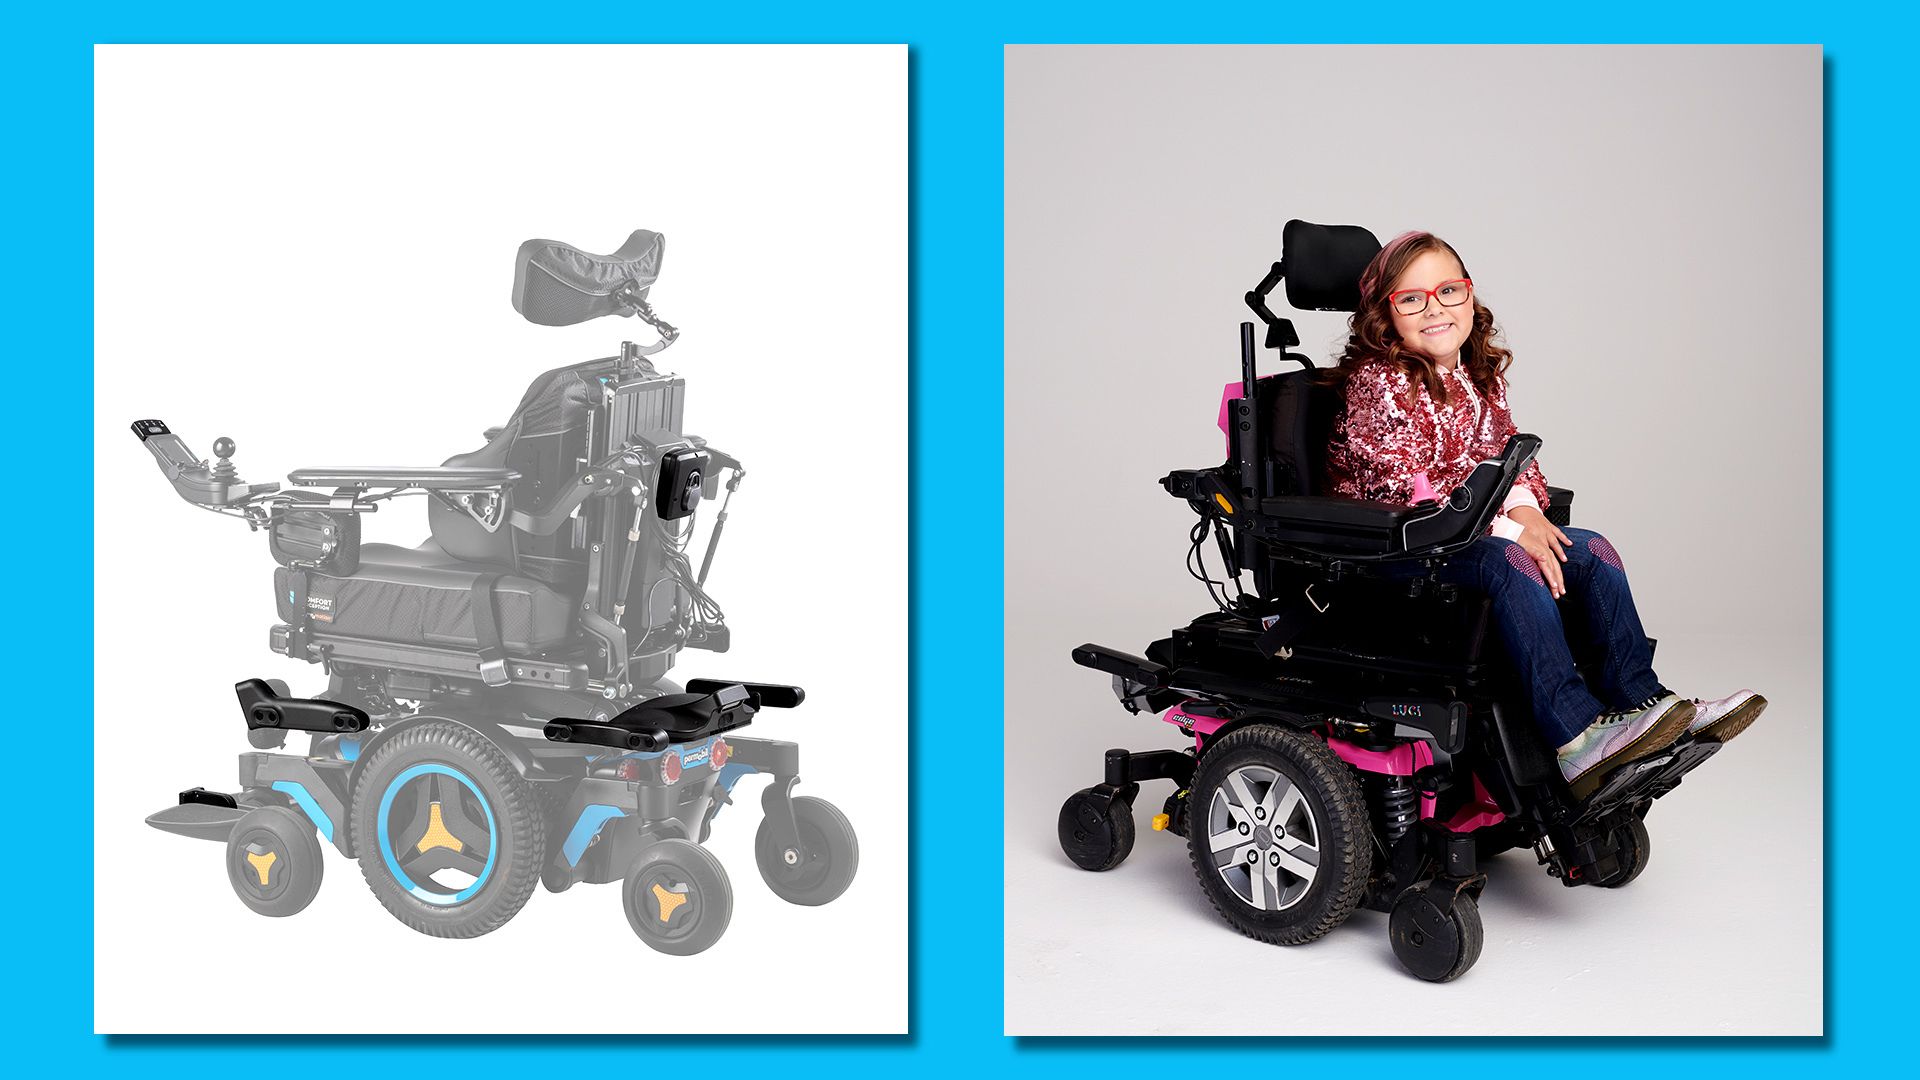 Image of a young girl in a motorized wheelchair equipped with LUCI's smart frame that adds sensors and other smart tech